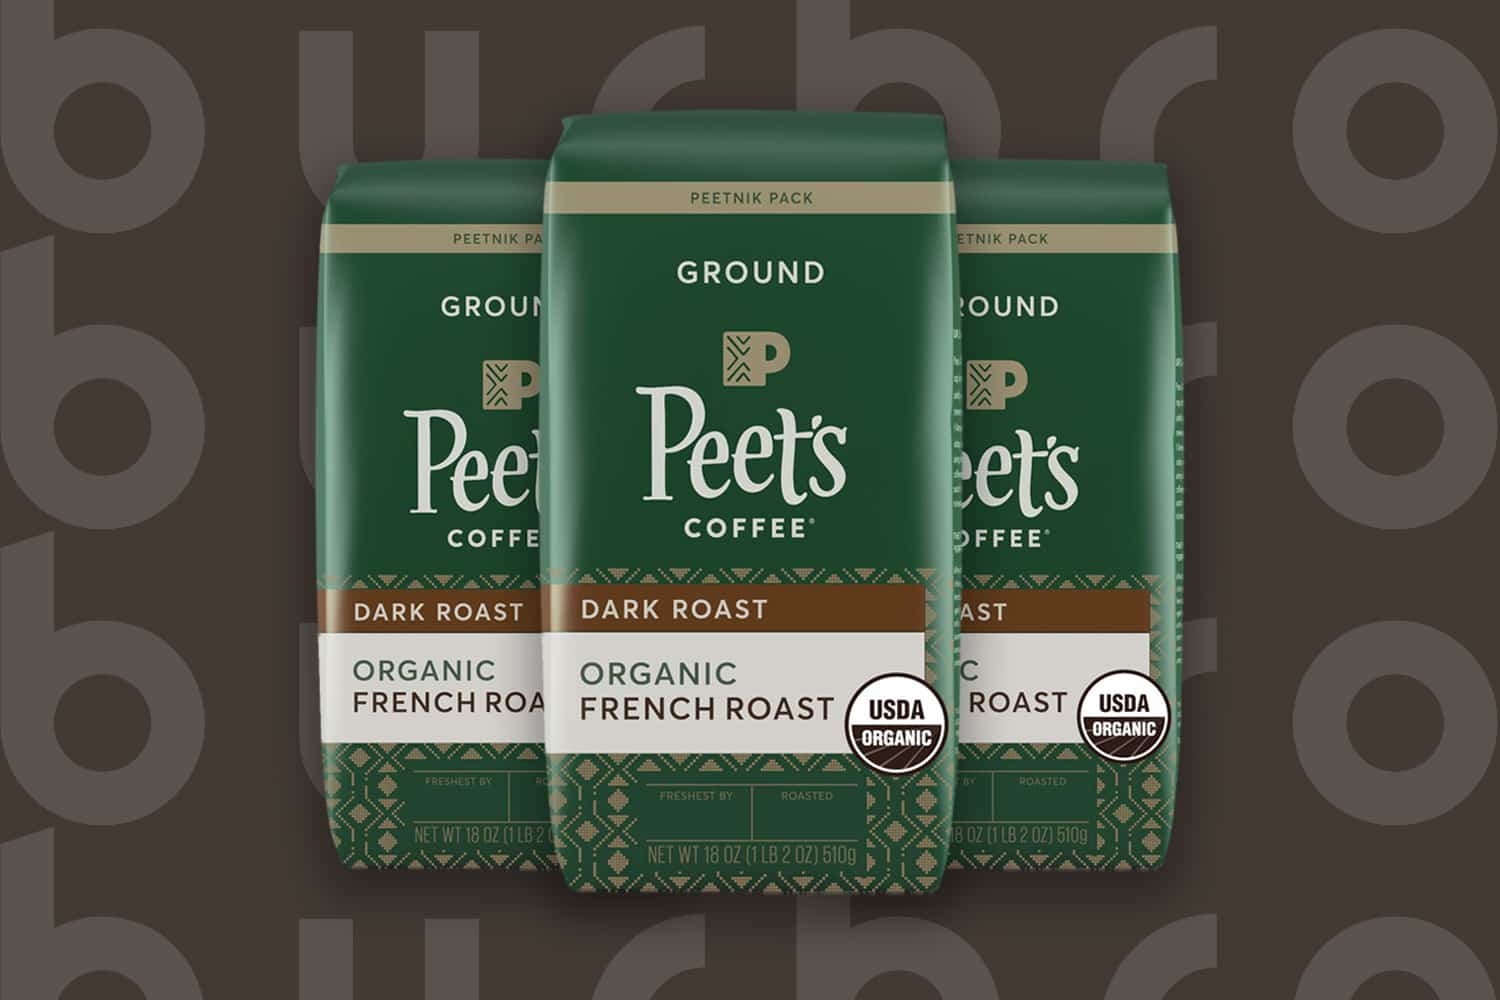 This is the cover photo for our Best Organic Coffee article. It features 3 green and brown bags of Peet's Organic French Roast Coffee, overlaid on a brown background with embossed Burbro logo.